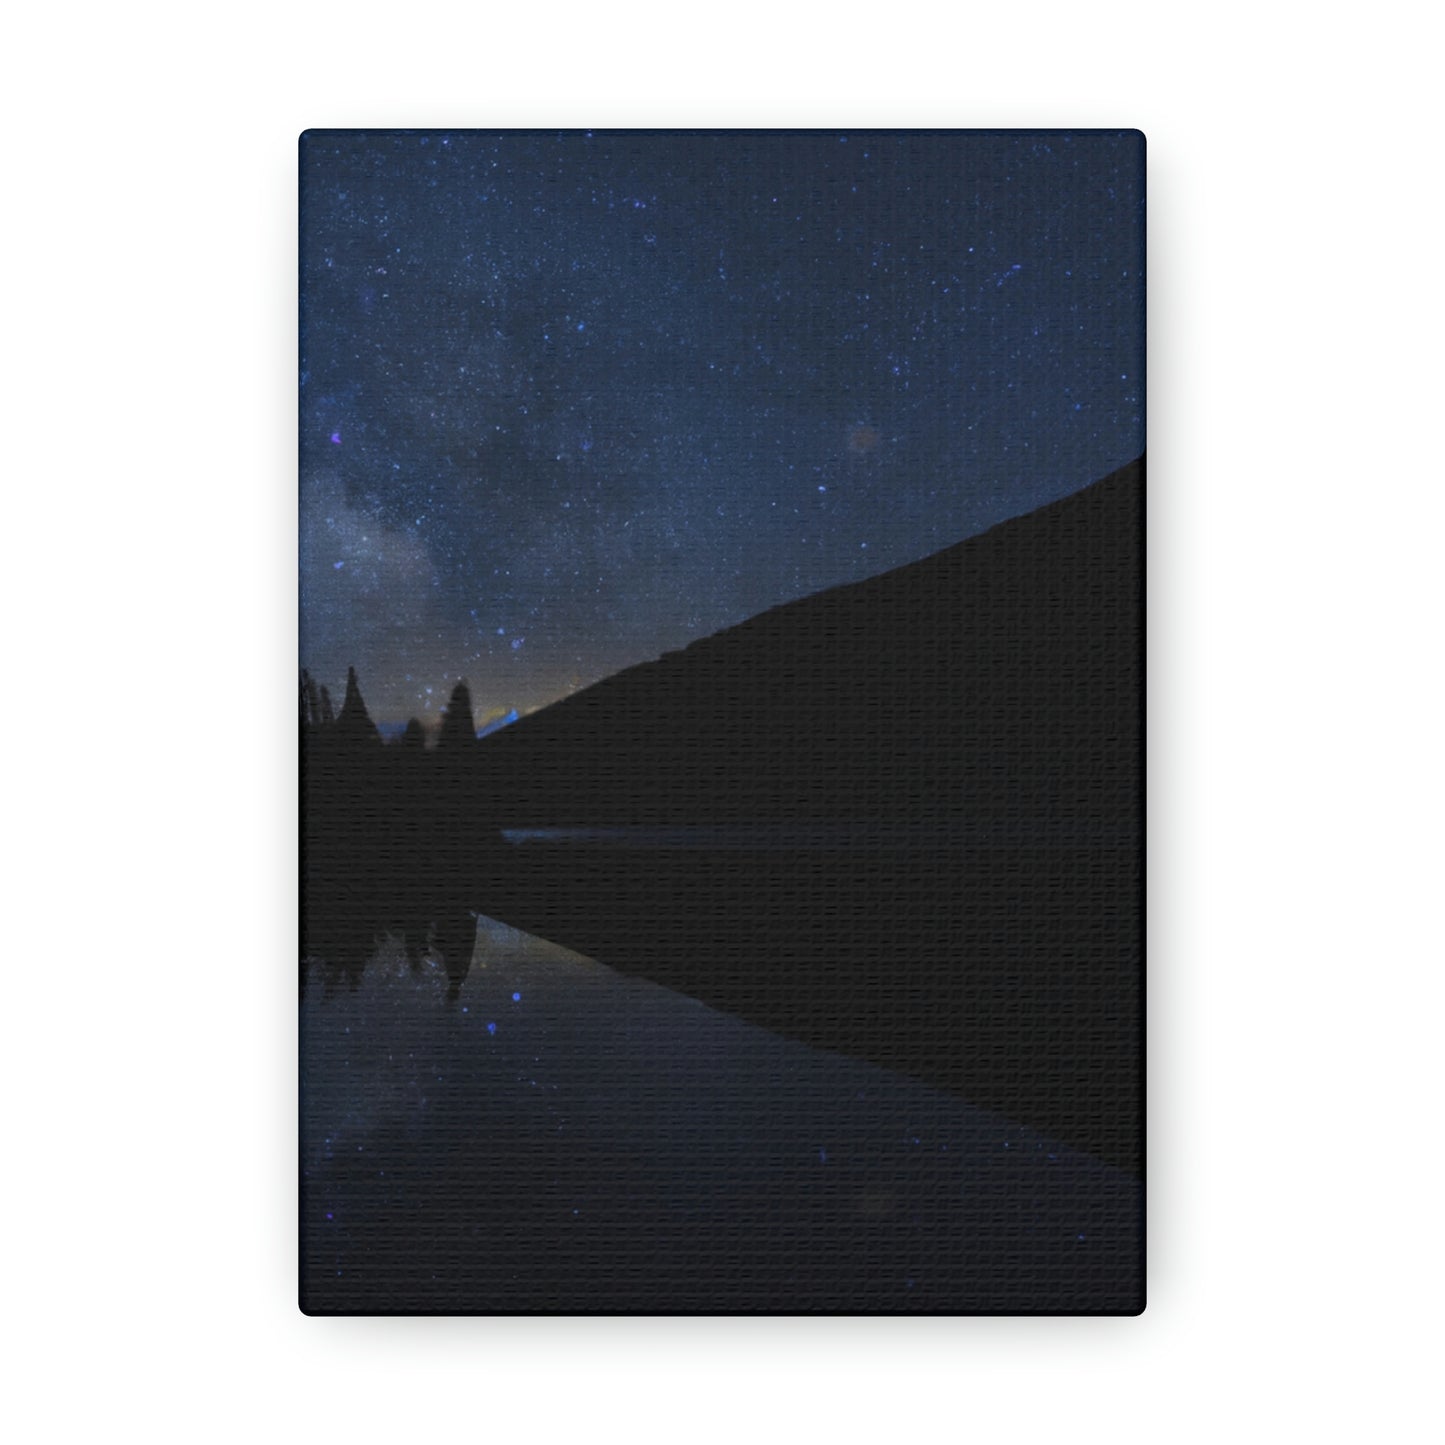 "A Starlit Tranquility" - The Alien Canva